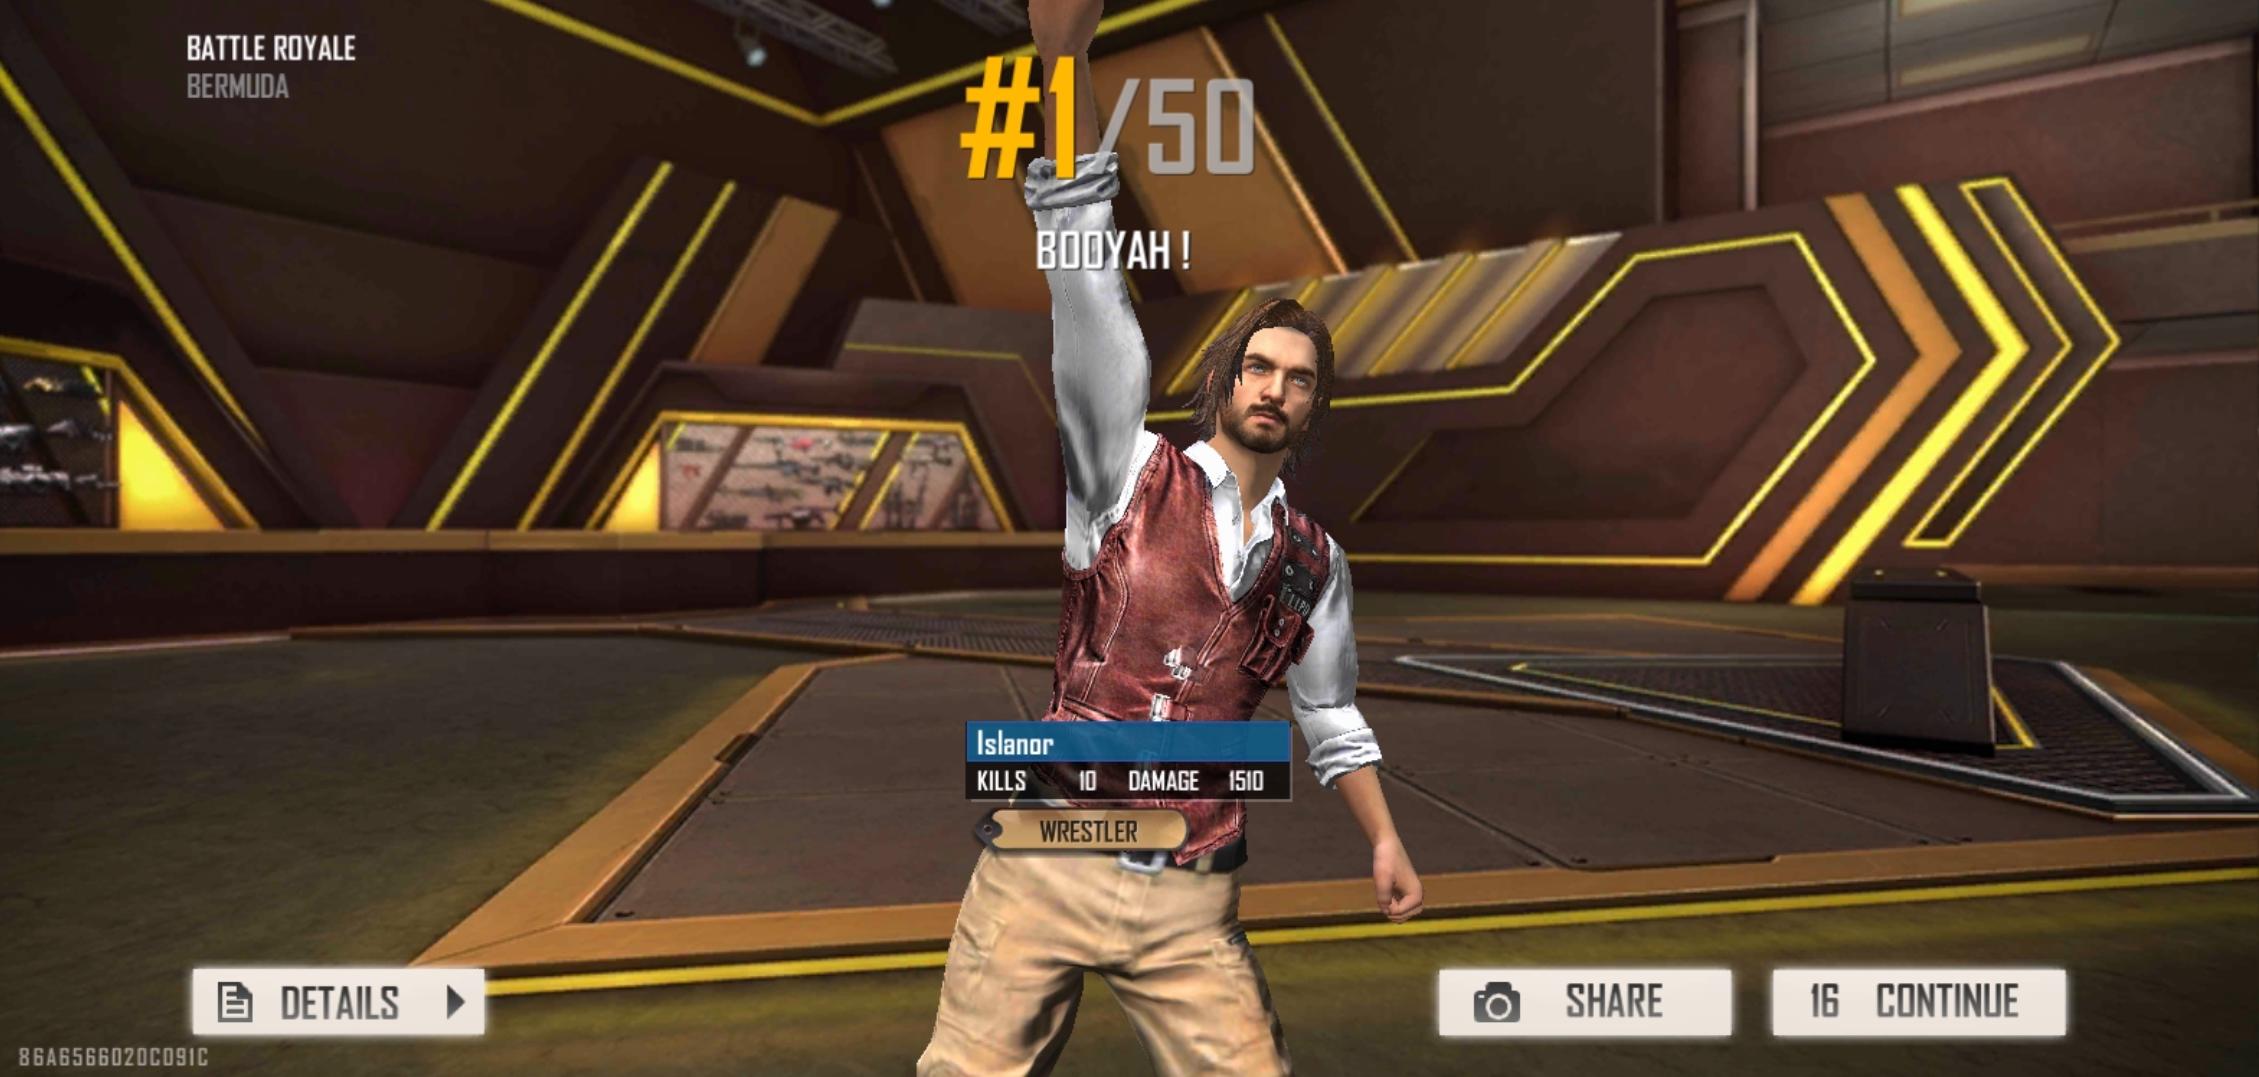 Play Garena Free Fire MAX Online for Free on PC & Mobile